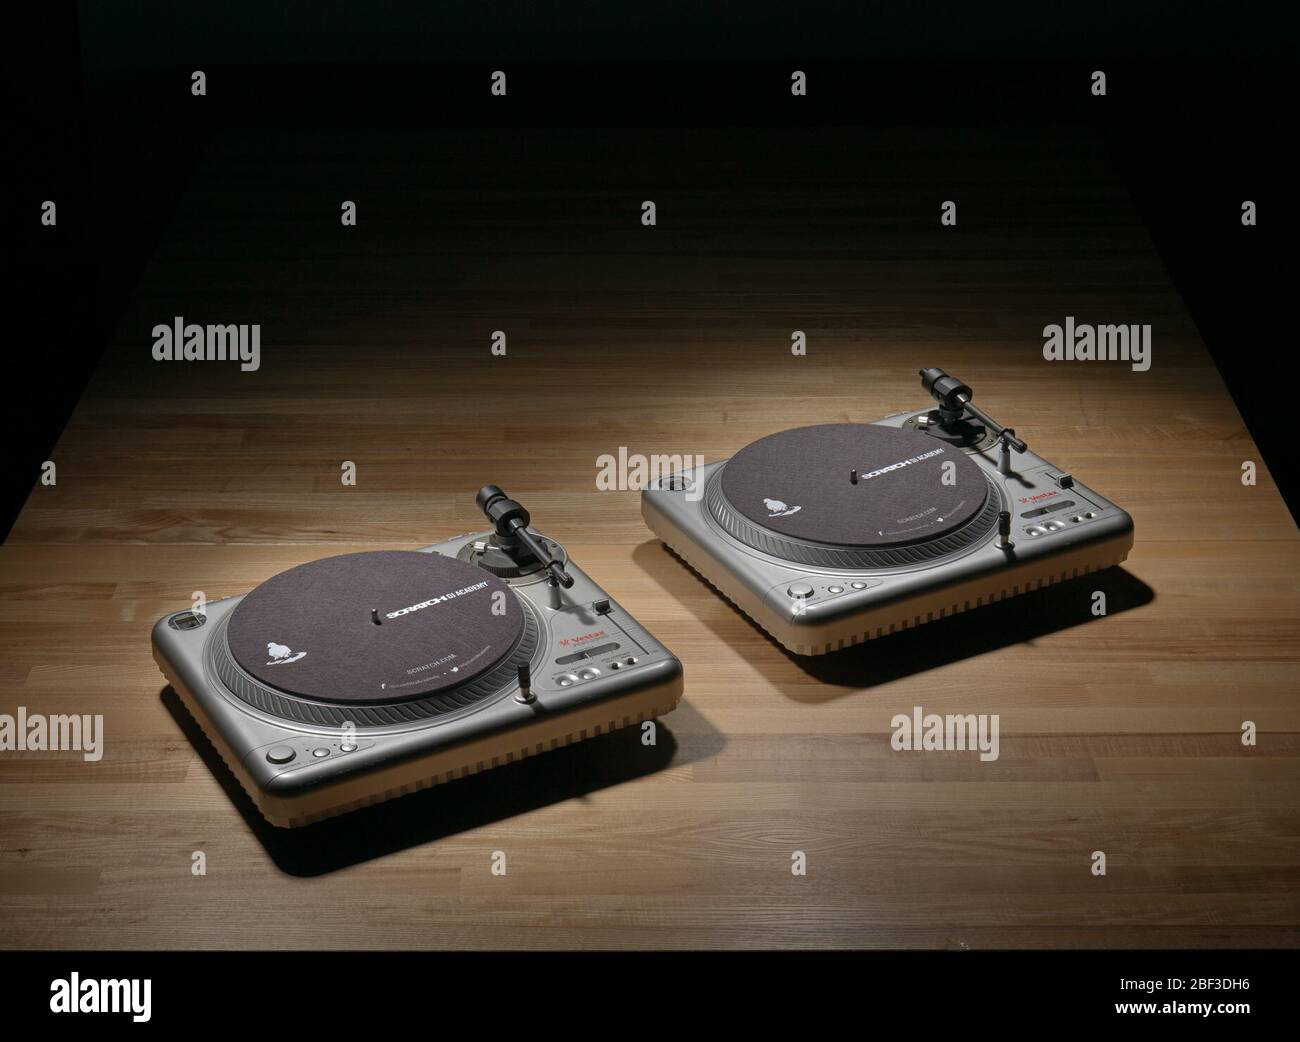 Turntable used by Grand Wizzard Theodore. Vestax PDX-2000 turntable made of plastic and metal.The body of the turntable is made of silver plastic. The top left corner of the turntable has a black and silver power button. Stock Photo